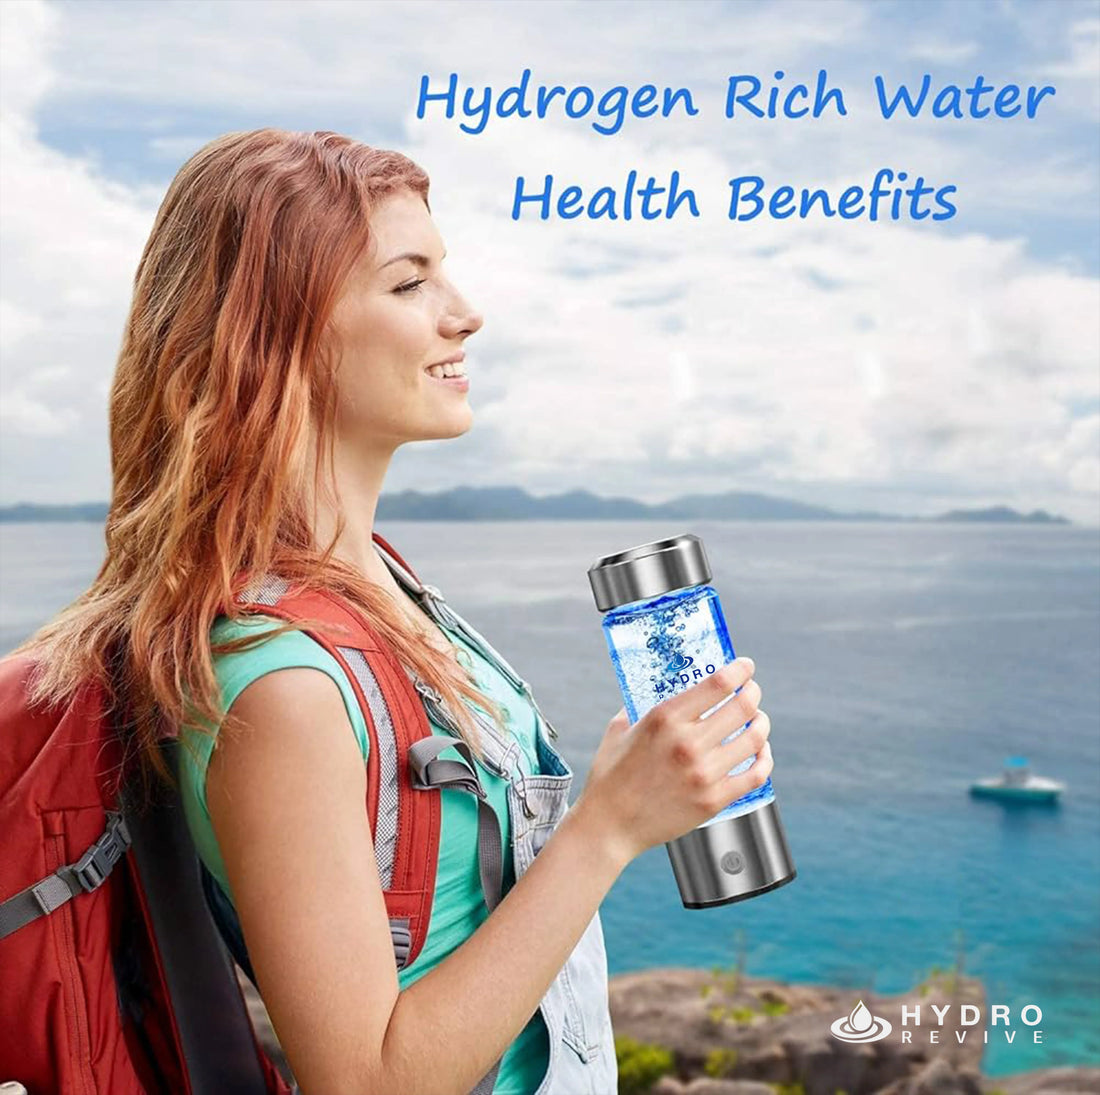 THE BEST PRACTICES FOR DRINKING AND USING HYDROGEN WATE